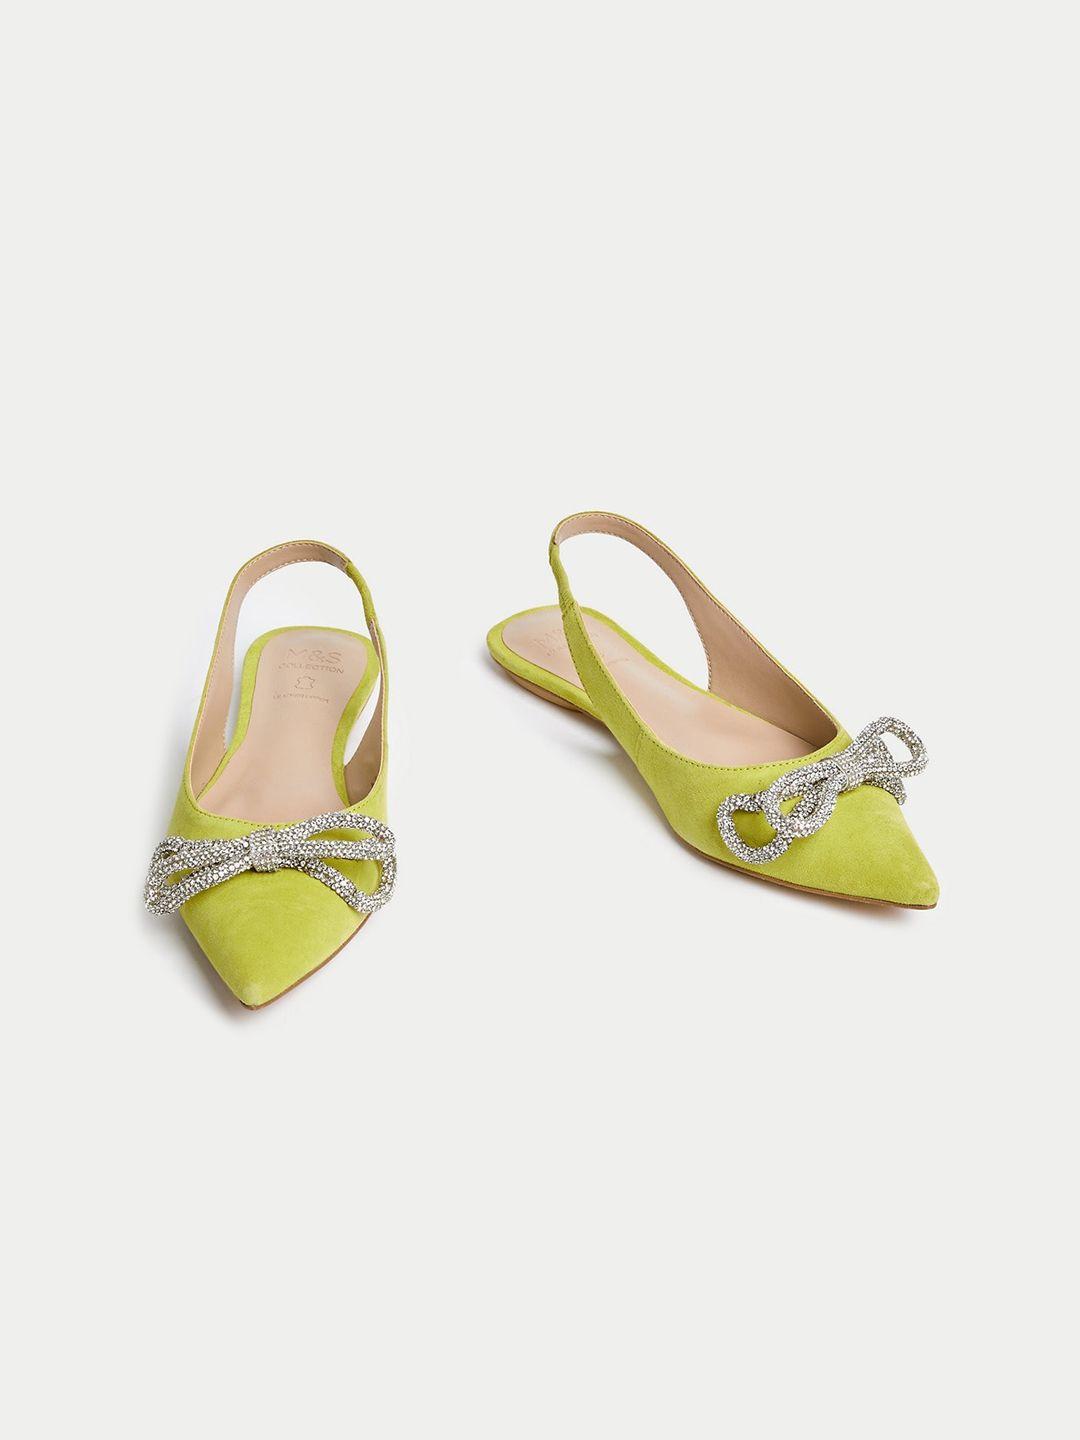 marks & spencer pointed toe mules with bows & backstrap